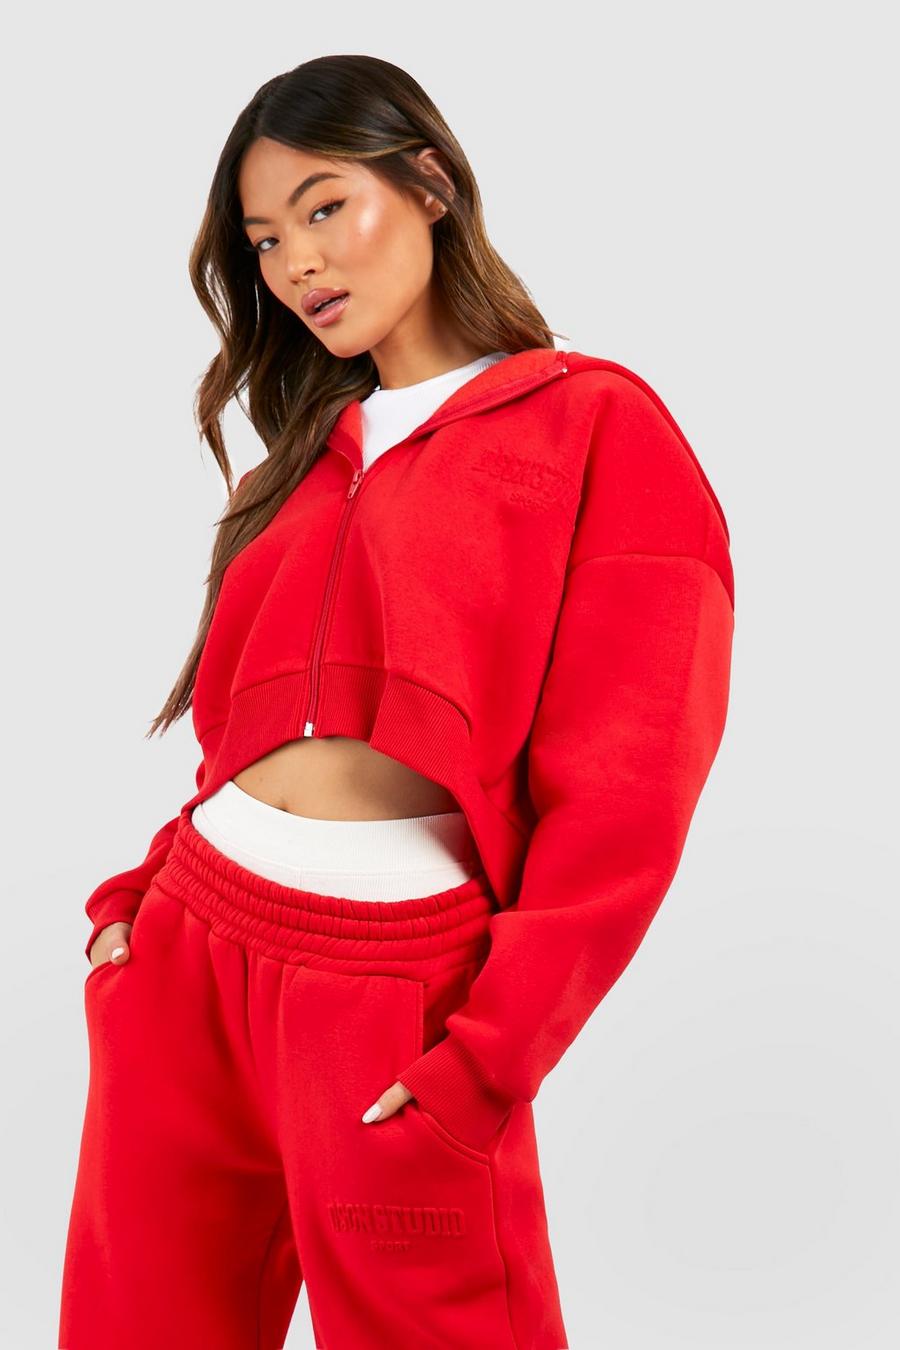 Red Dsgn Studio Embossed Boxy Cropped Stay warm and feel the sweet softness of ® Calimero 1 2 Zip sweatshirt throughout your day 